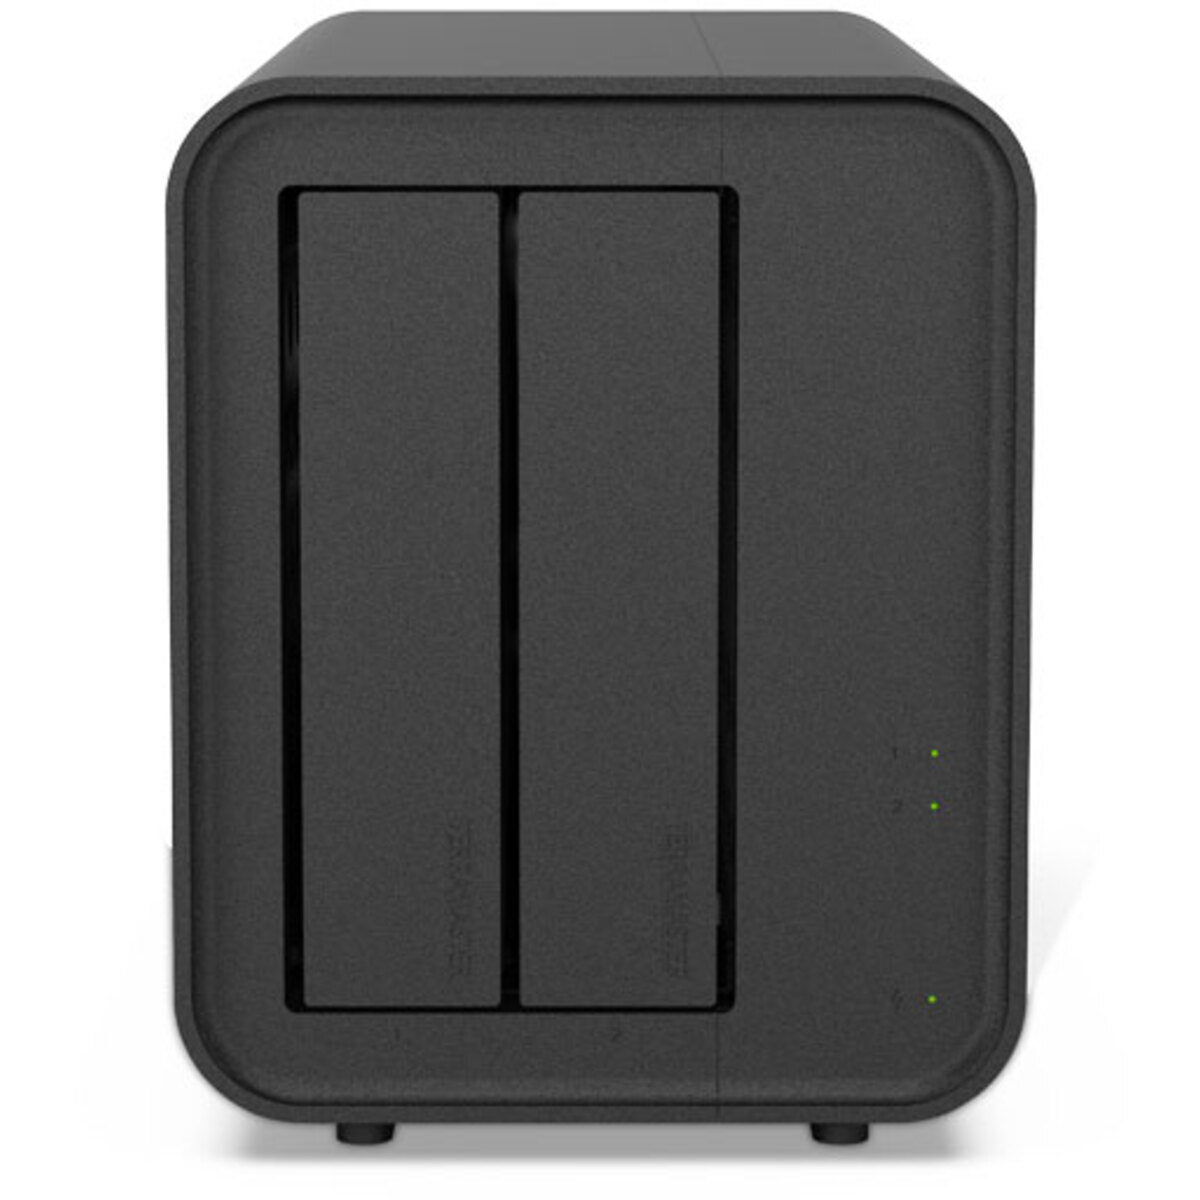 TerraMaster F2-424 16tb 2-Bay Desktop Multimedia / Power User / Business NAS - Network Attached Storage Device 1x16tb Seagate EXOS X18 ST16000NM000J 3.5 7200rpm SATA 6Gb/s HDD ENTERPRISE Class Drives Installed - Burn-In Tested F2-424